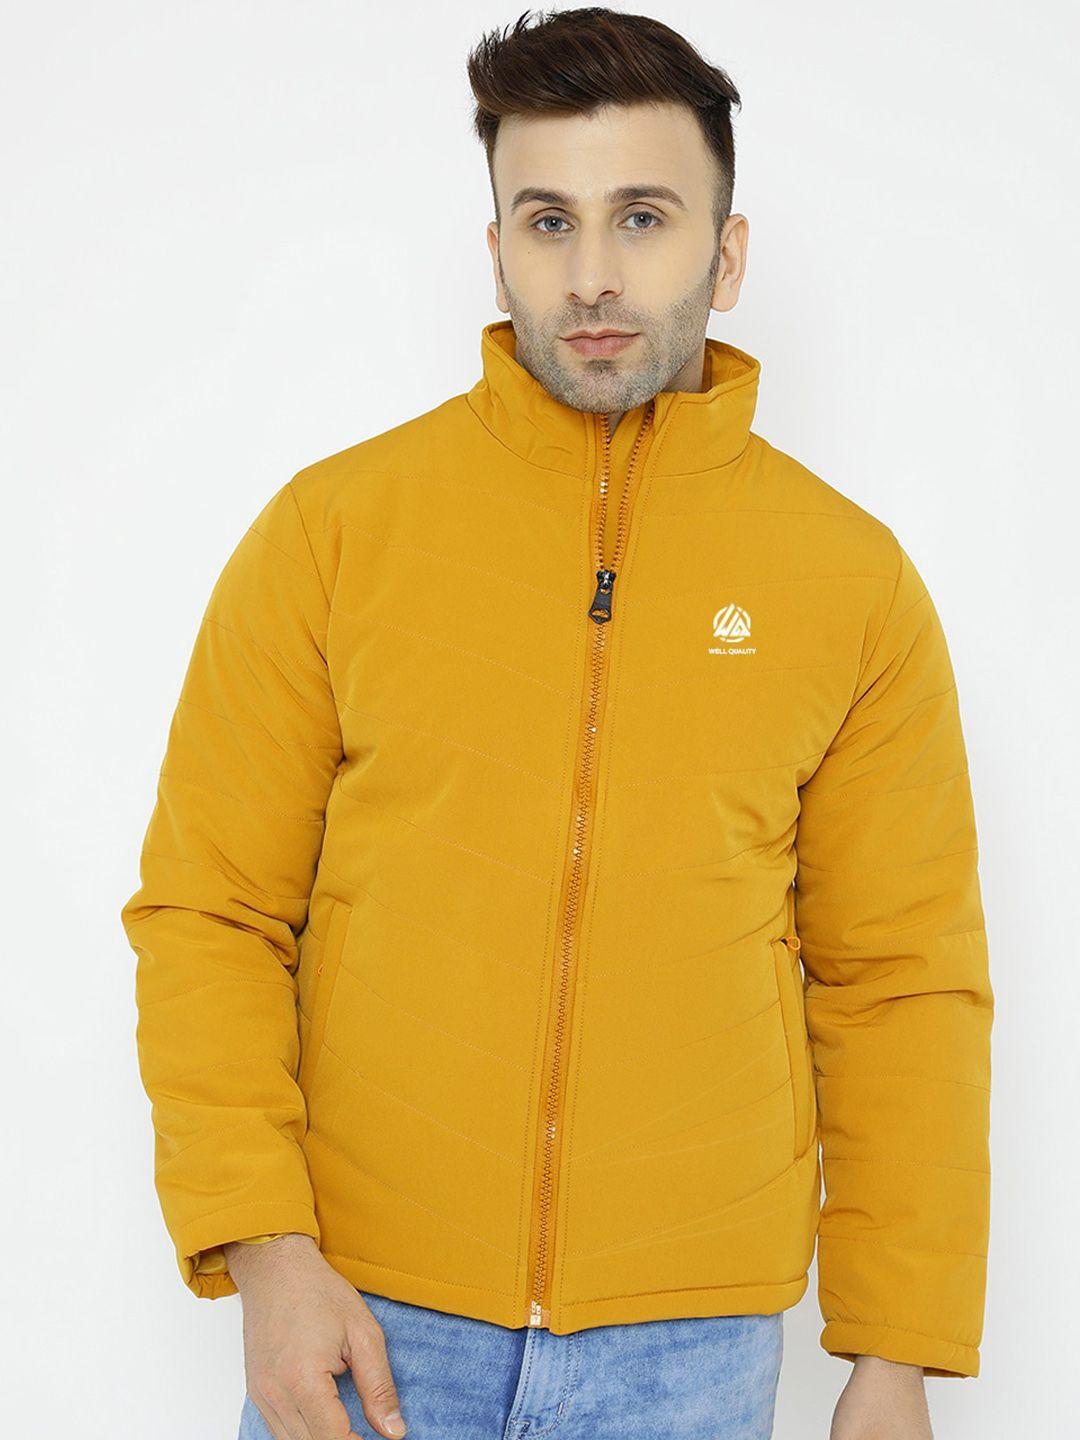 well quality mock collar dry fit lightweight padded jacket